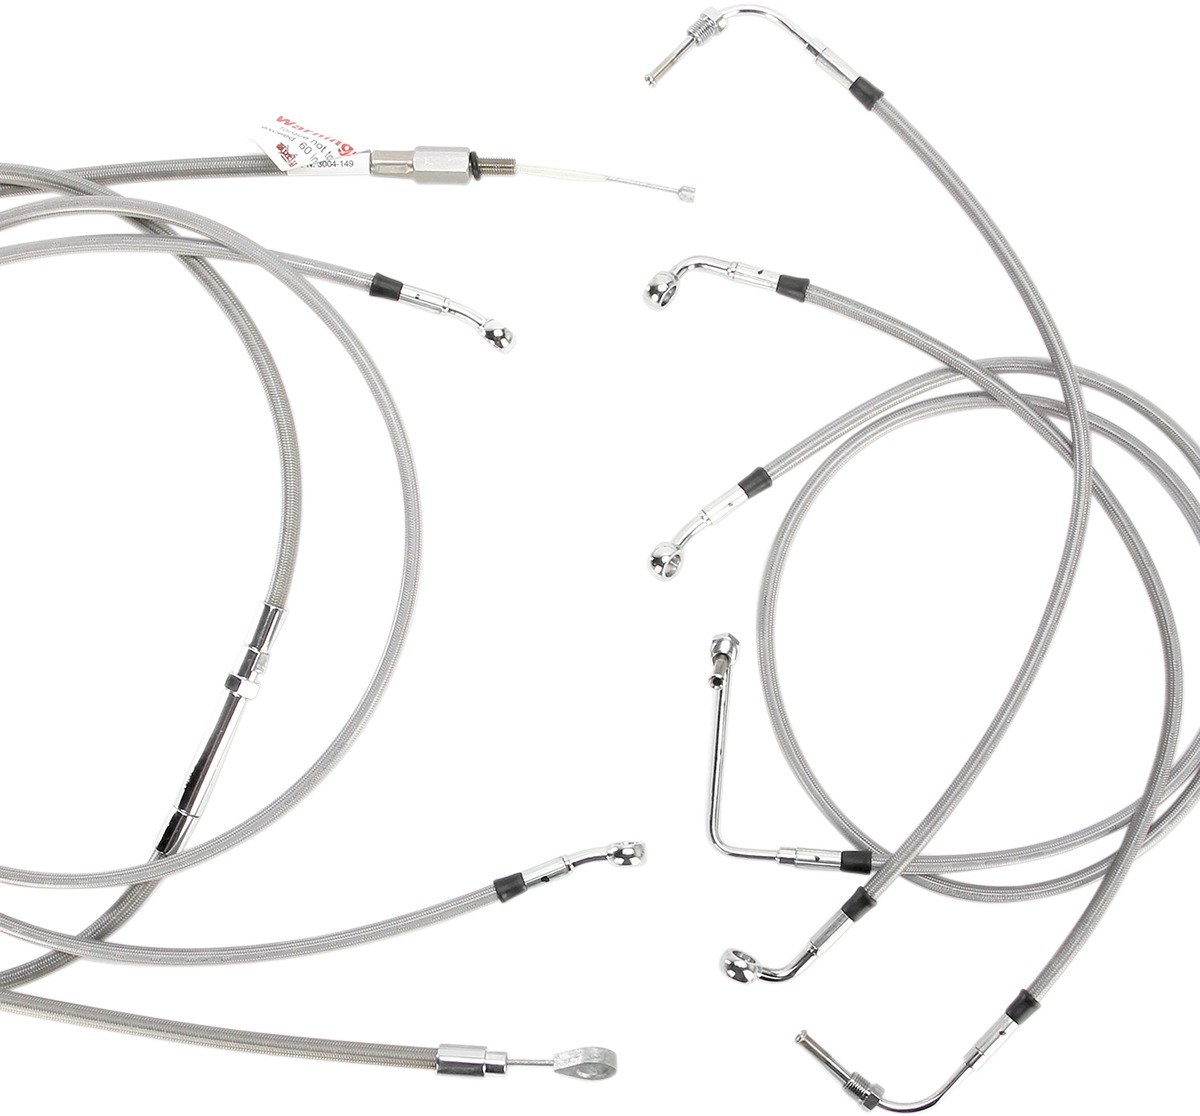 Extended S.S. Control Cable Kit for Baggers - 15" tall bars (ABS) - Click Image to Close